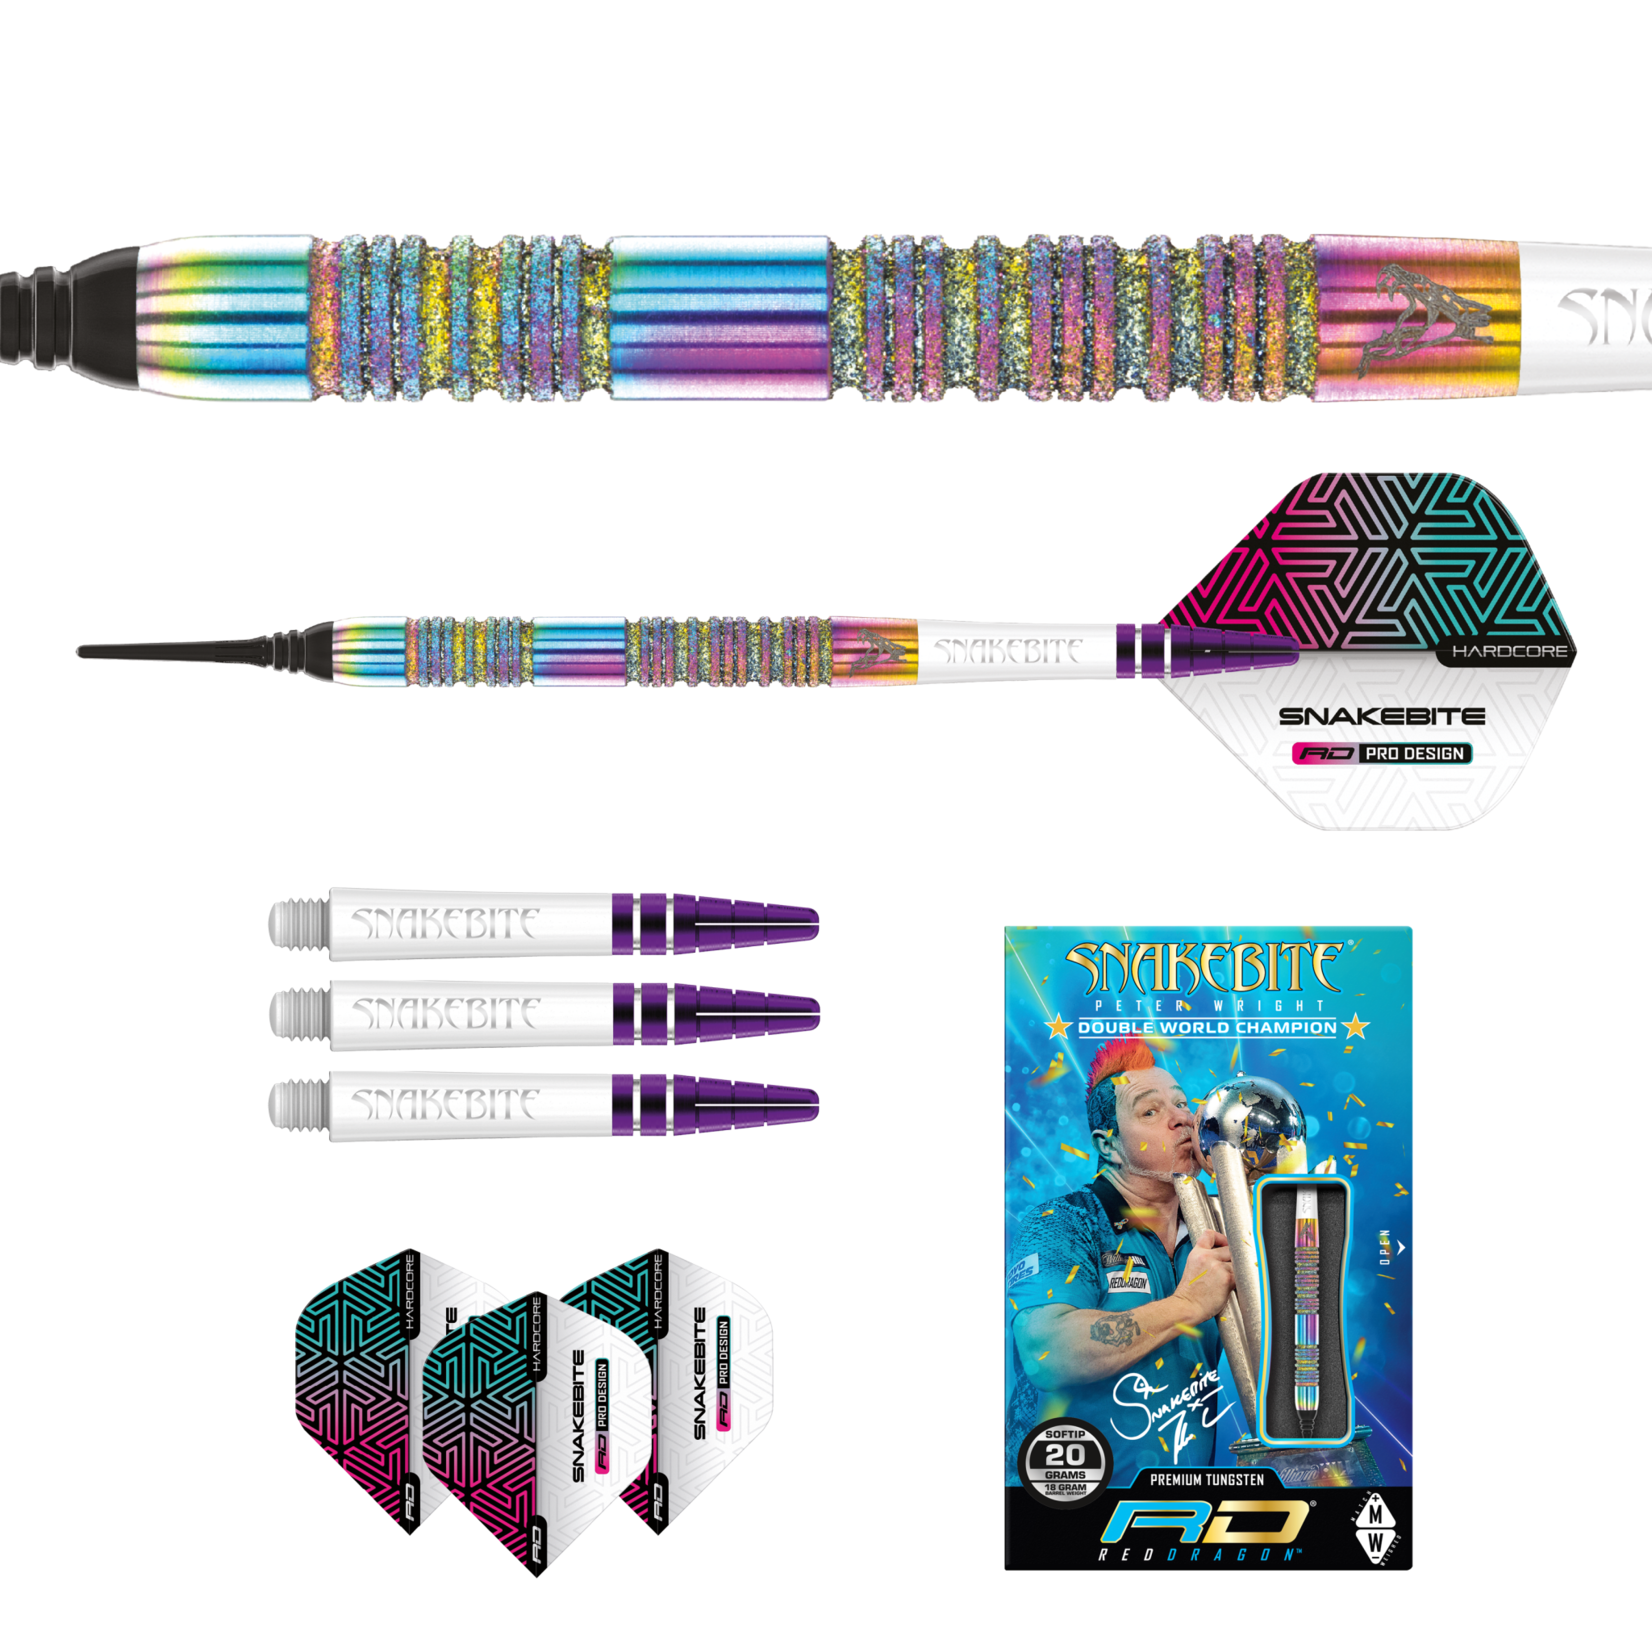 RED DRAGON Red Dragon Peter Wright - Diamond Fusion Spectron SE 18g Soft Tip Darts